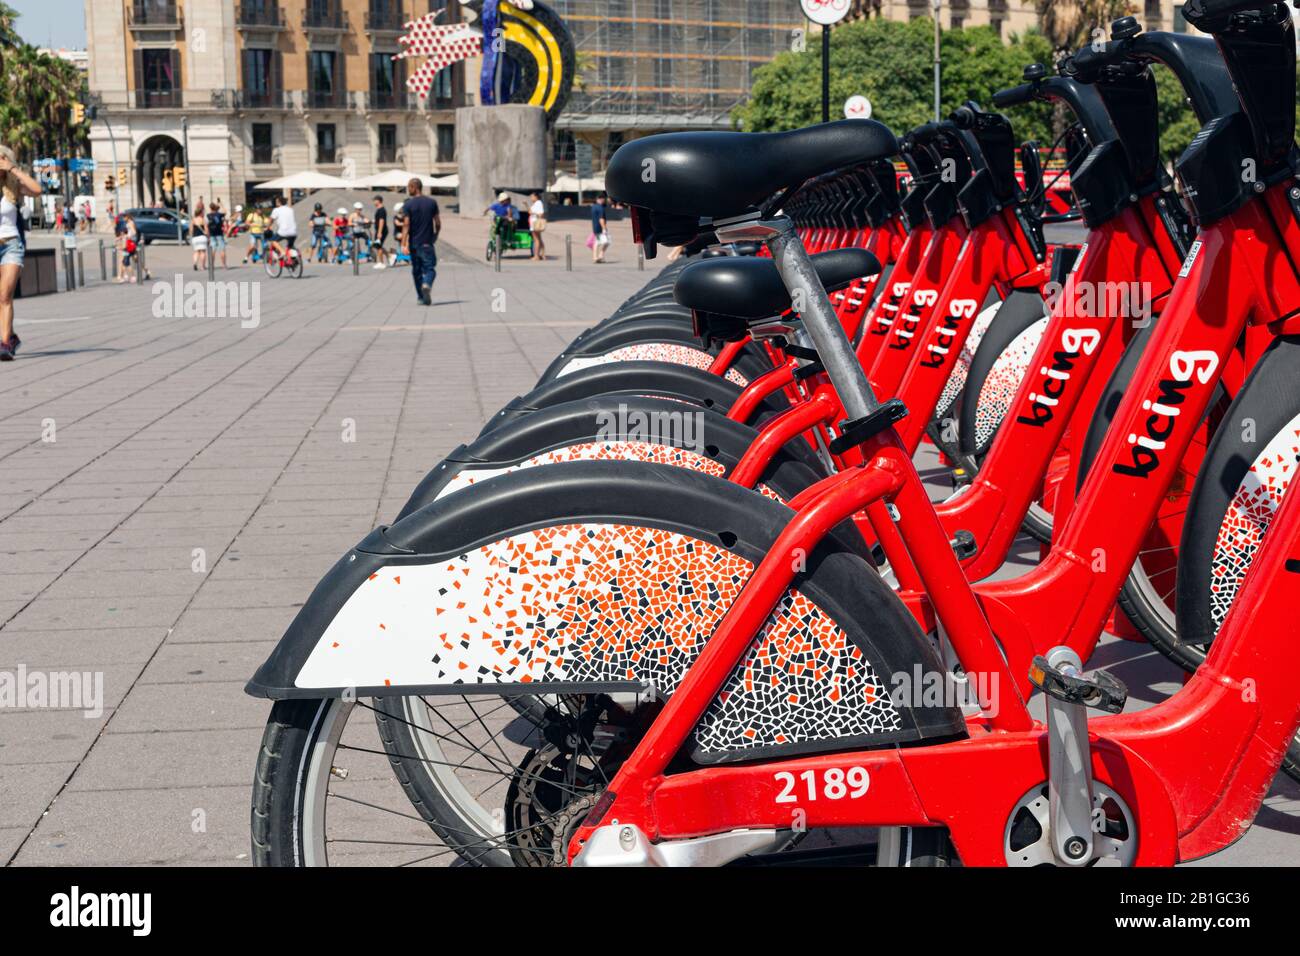 BARSELONA, SPAIN - AUGUST 6, 2019: Bicycles for rent on the street of the city. Stock Photo